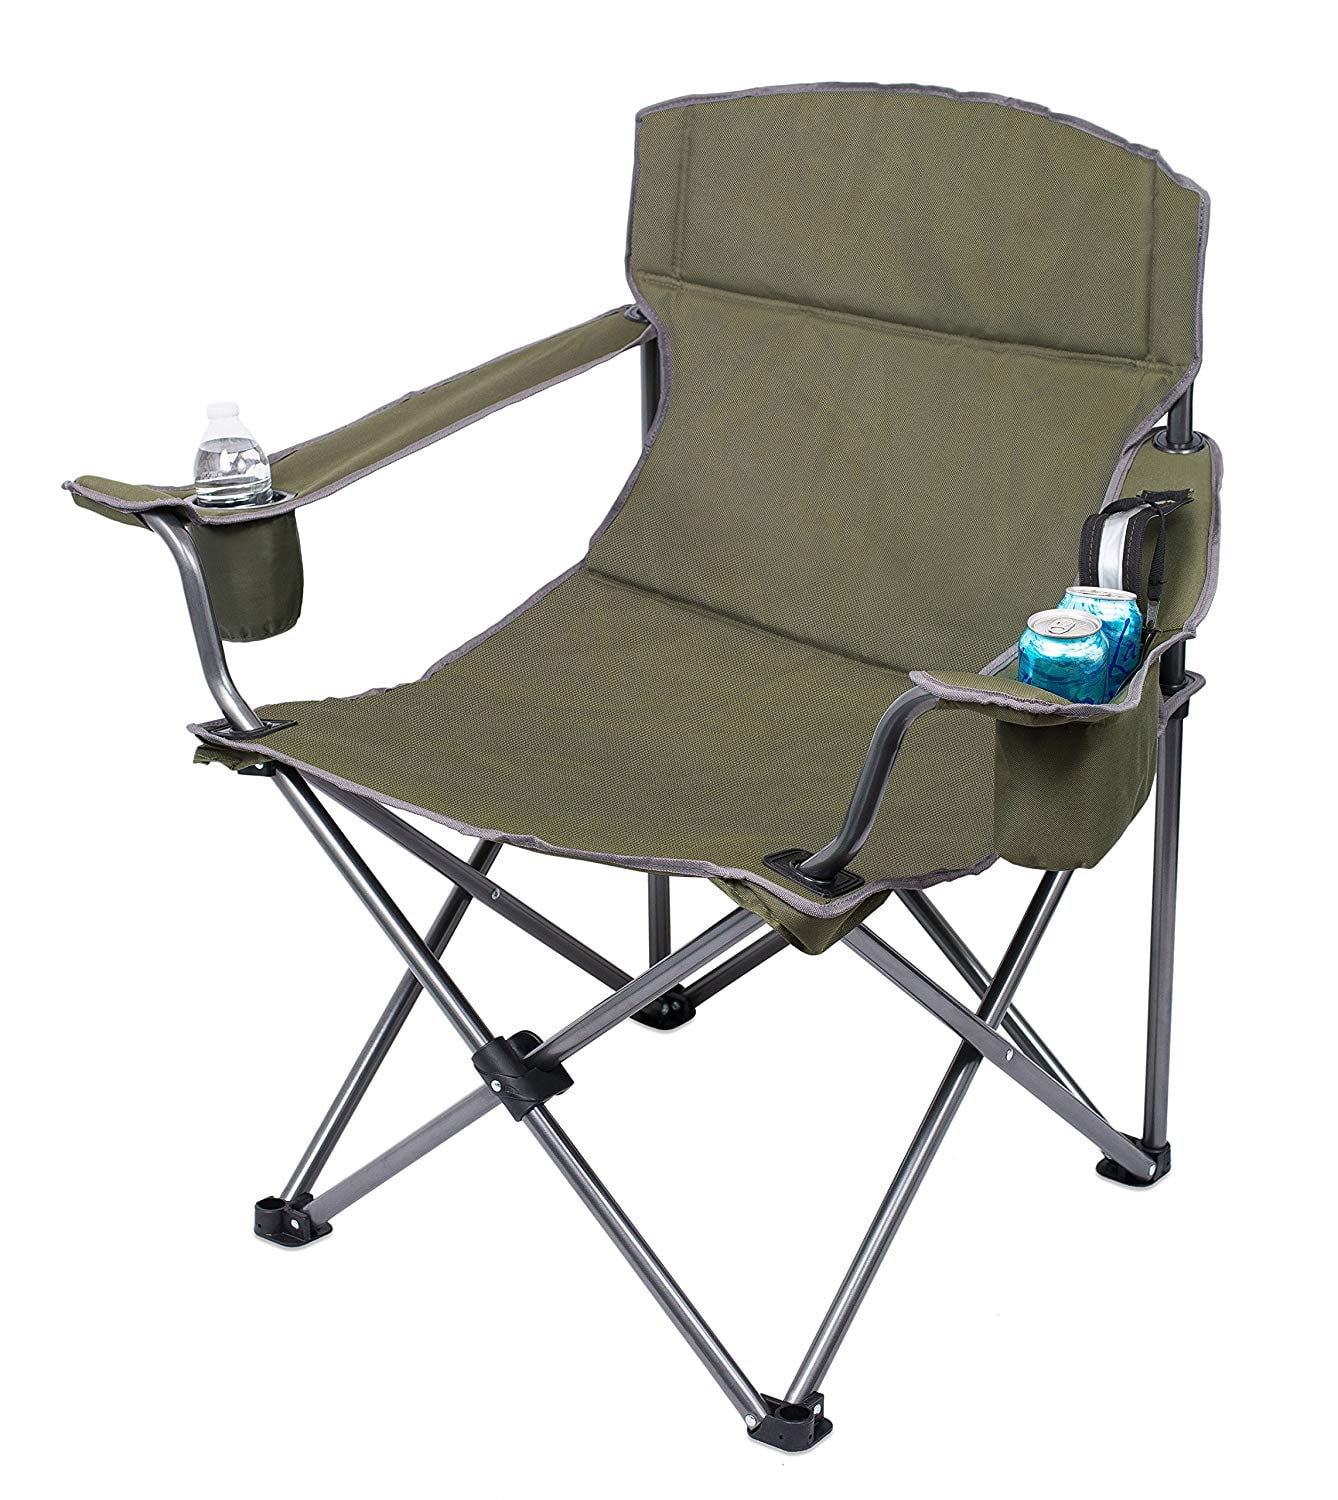 ARROWHEAD OUTDOOR Portable Folding Camping Quad Chair w/ 4-Can 